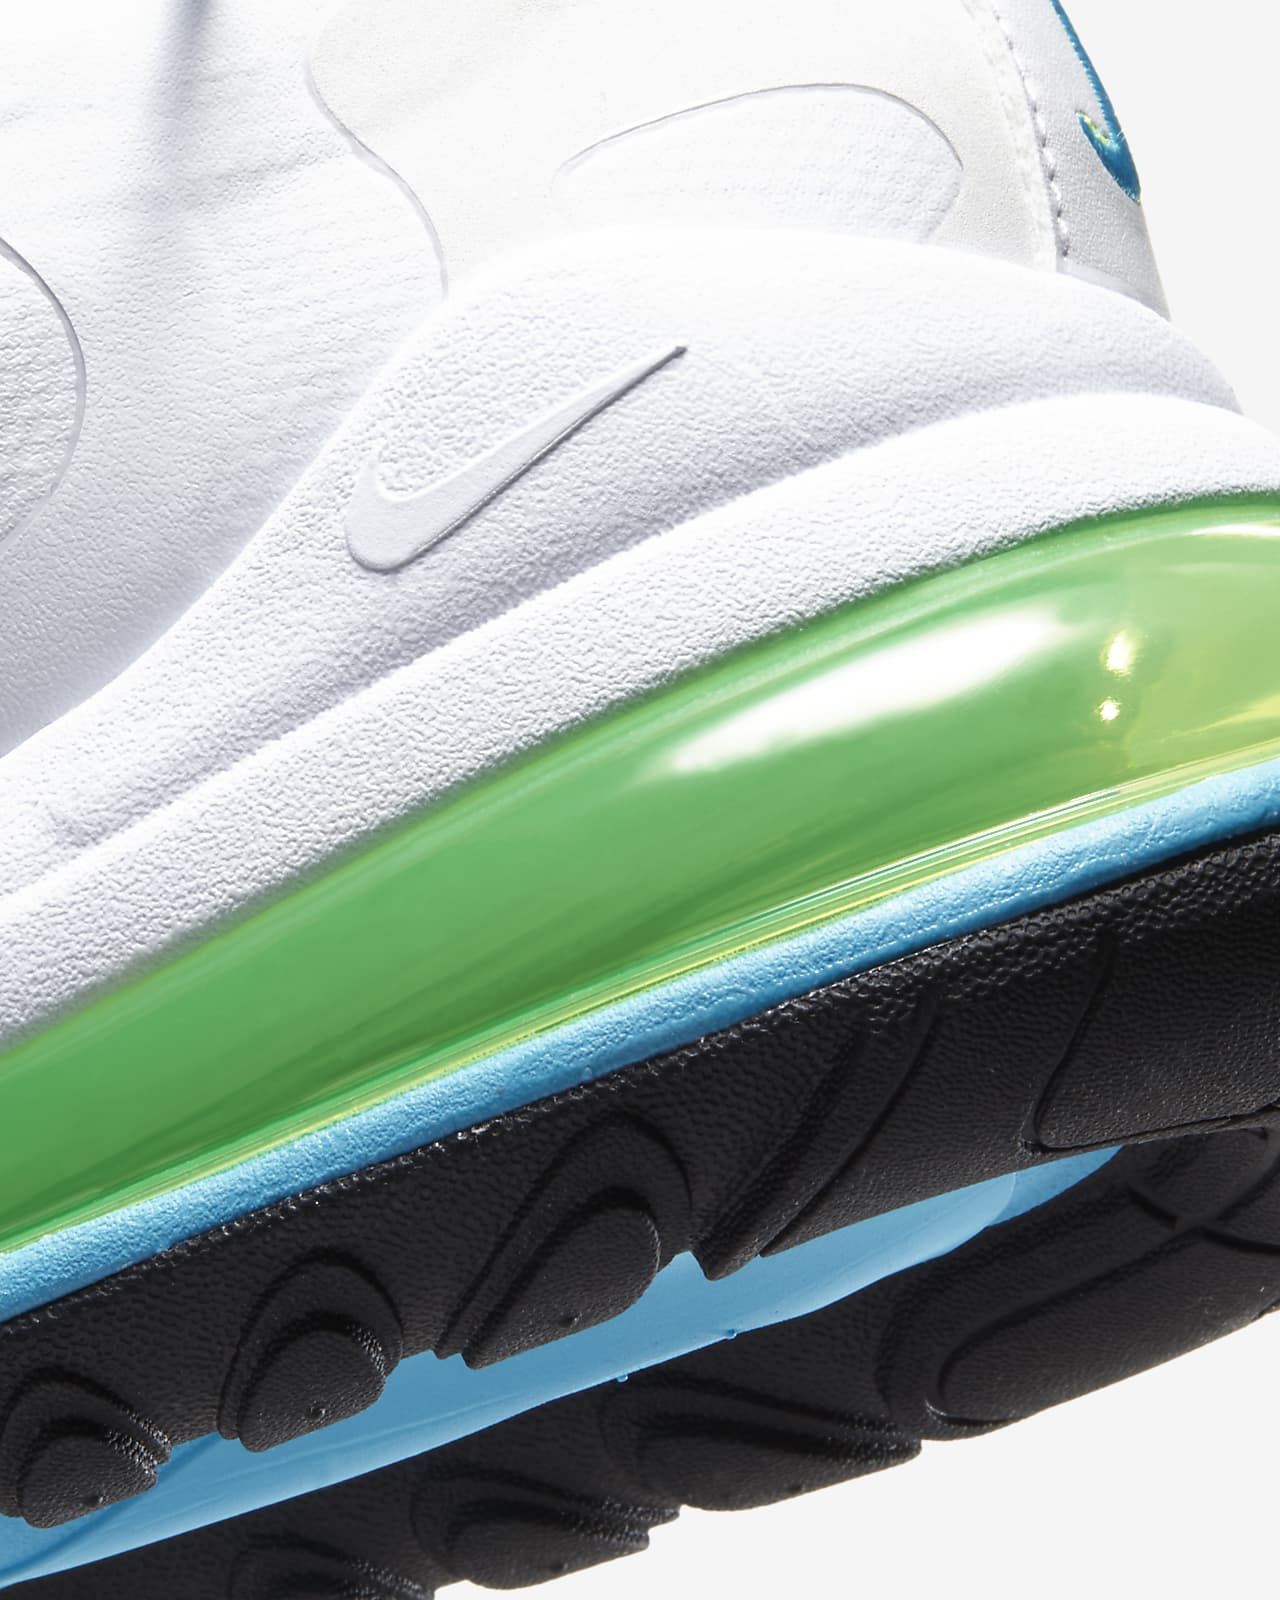 nike air max 270 react size guide